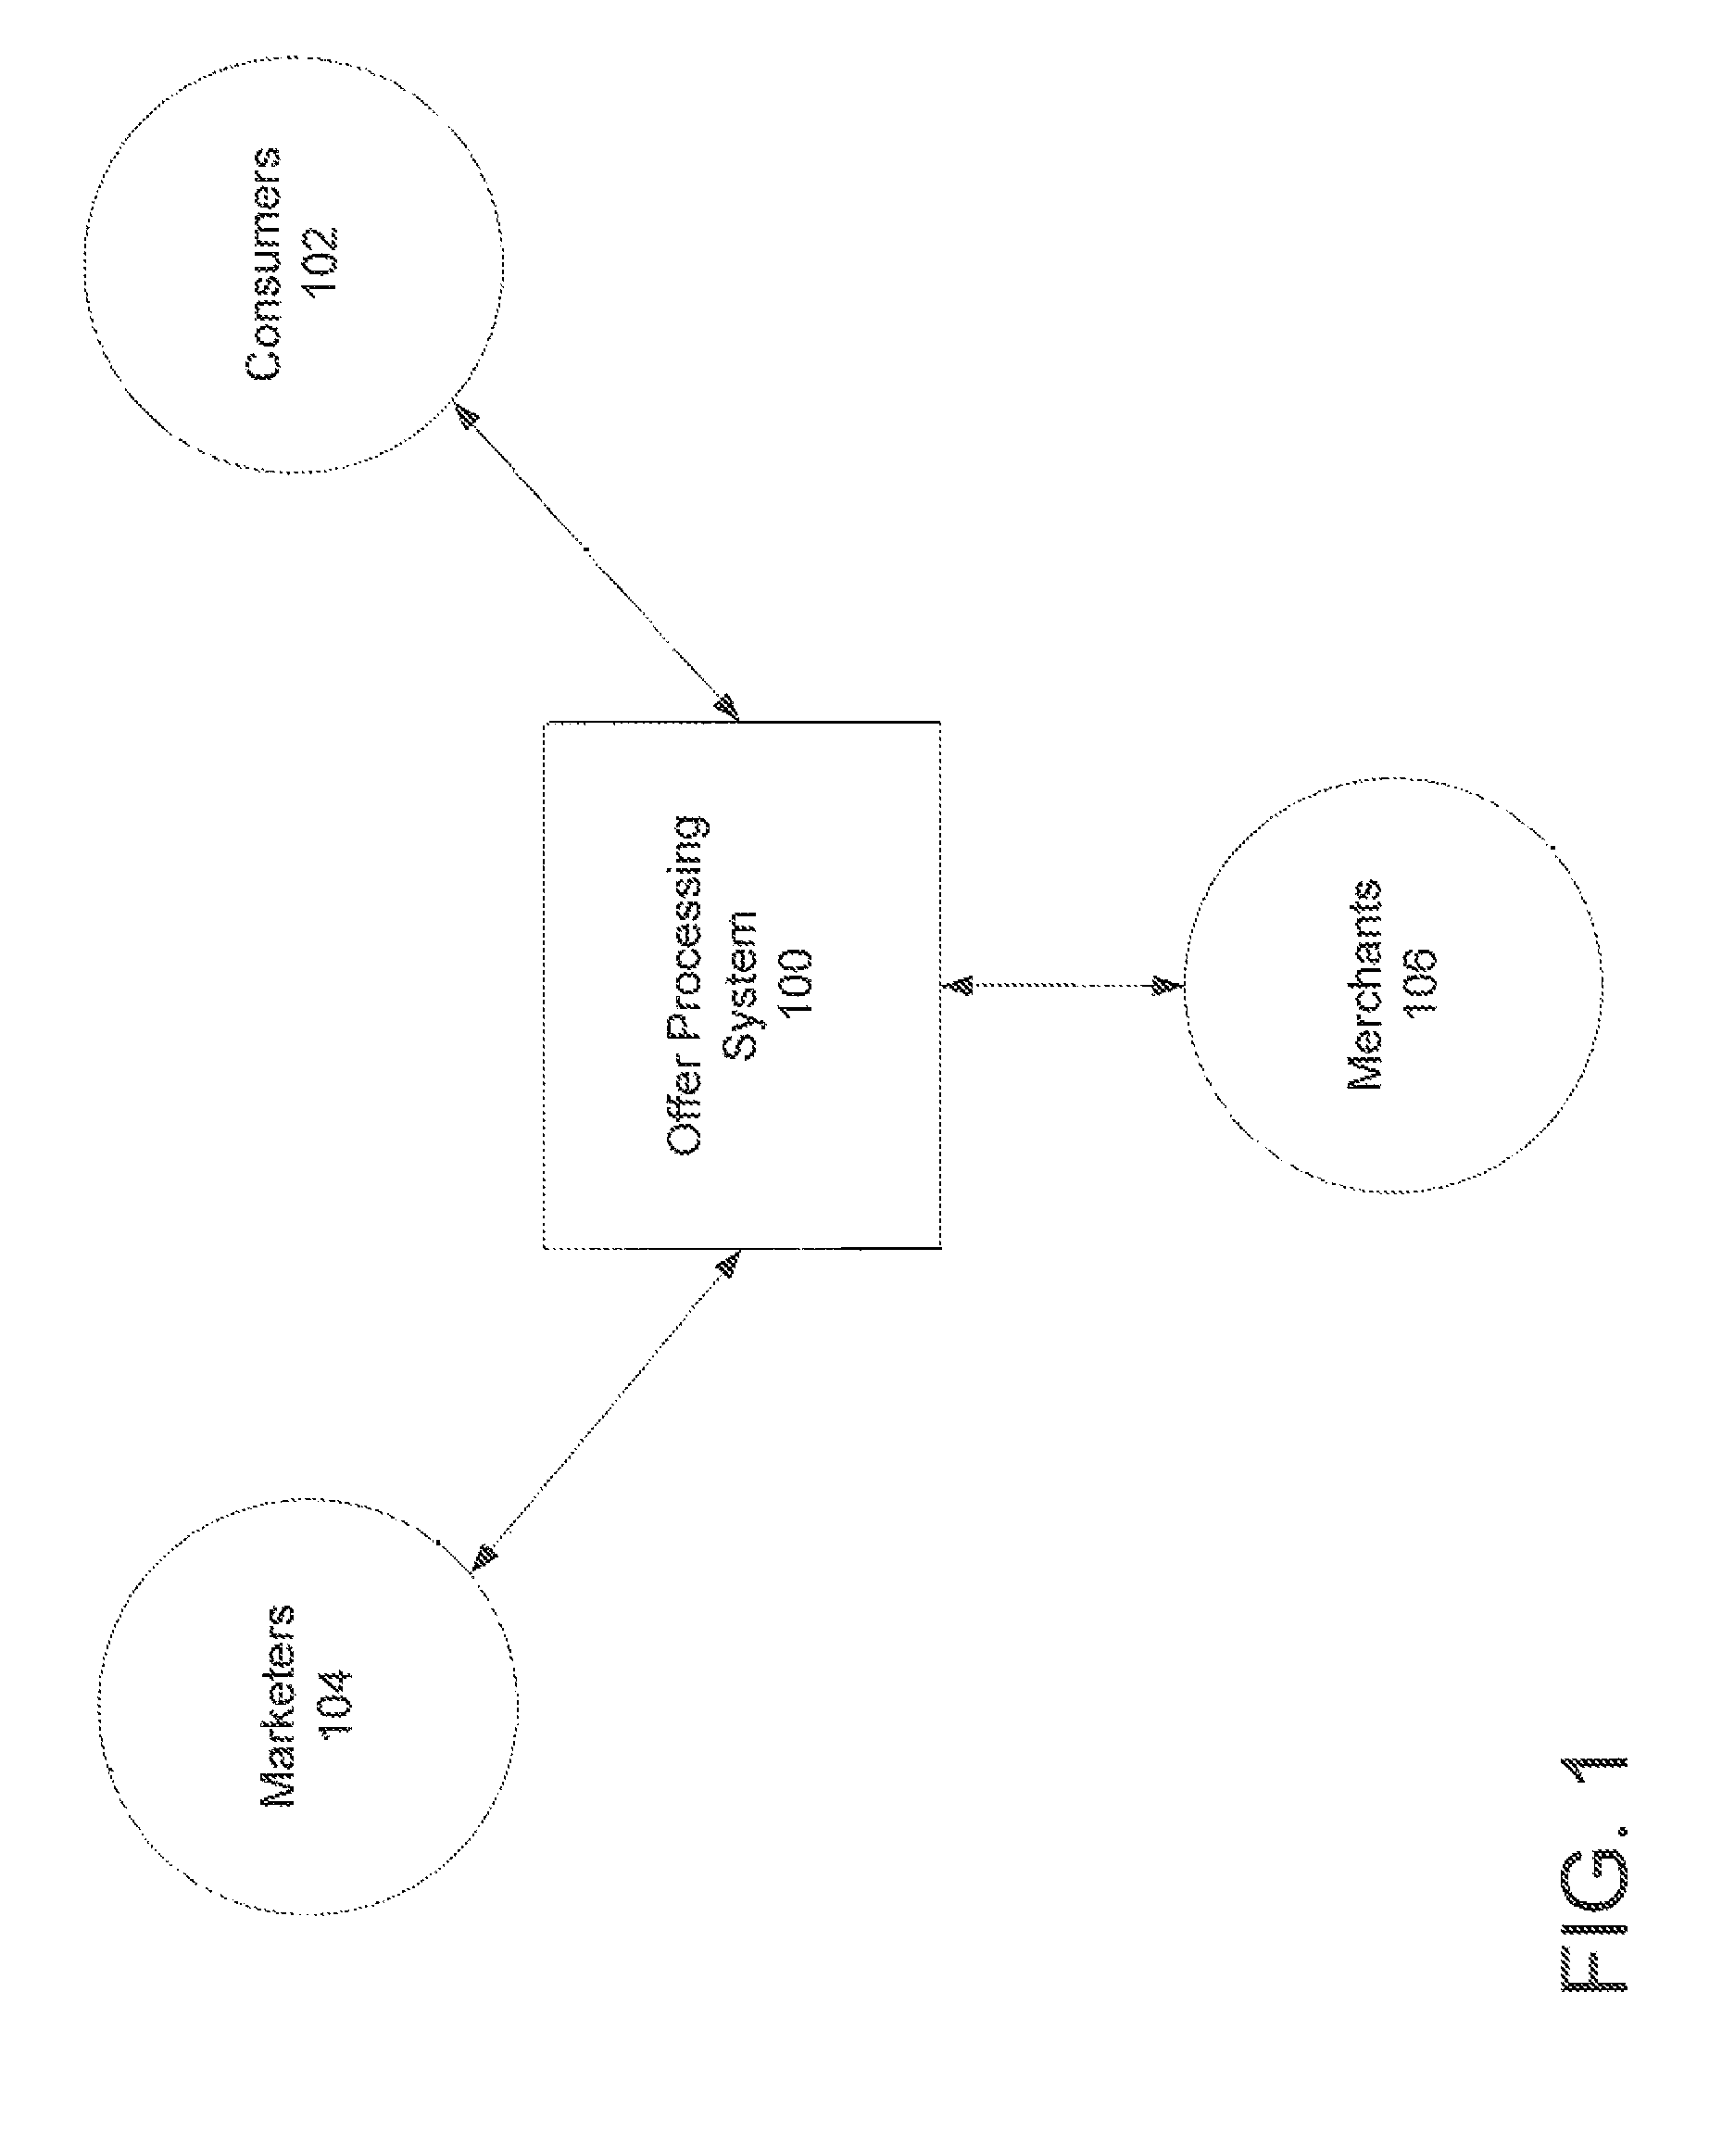 System and method for managing promotional offers using a communications platform